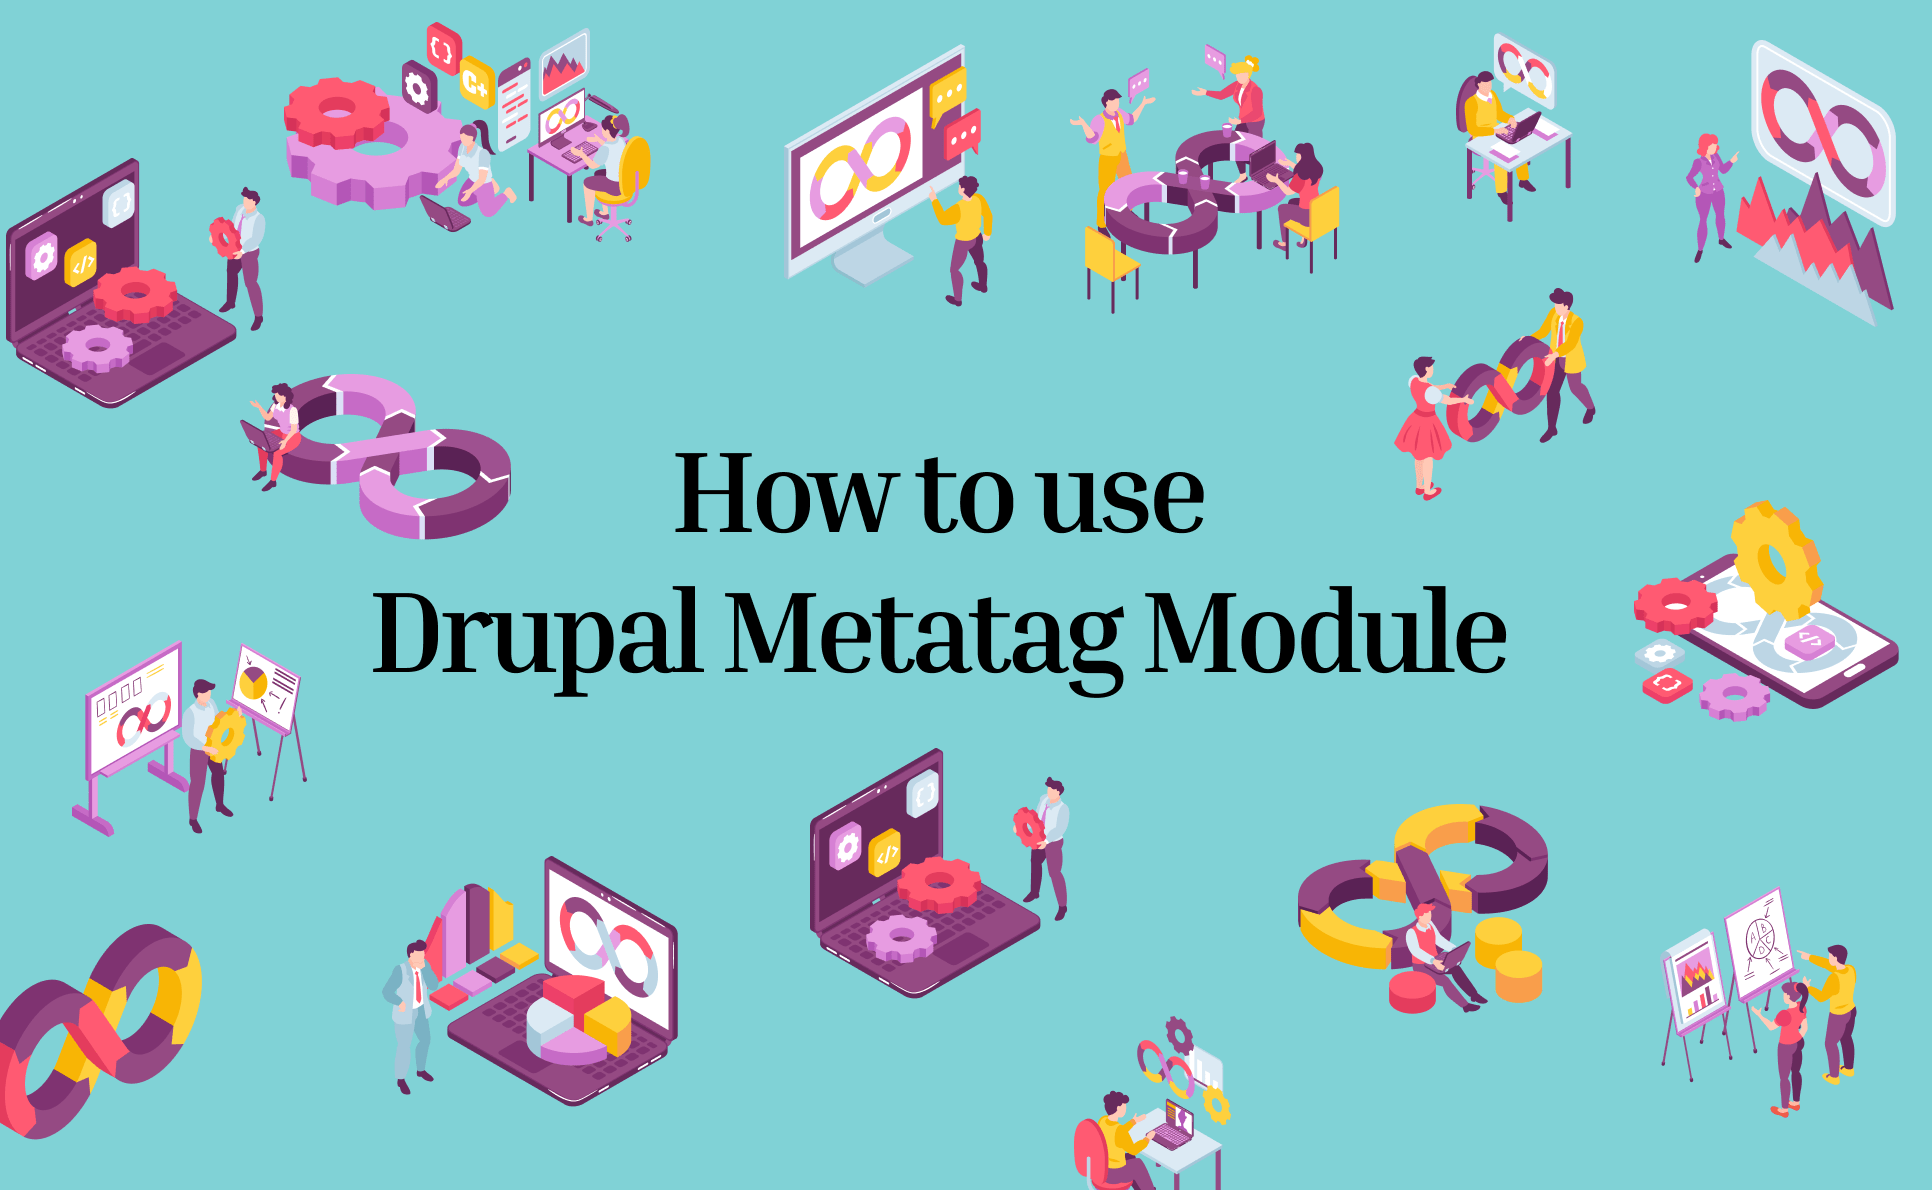 How to use Drupal Metatag Module